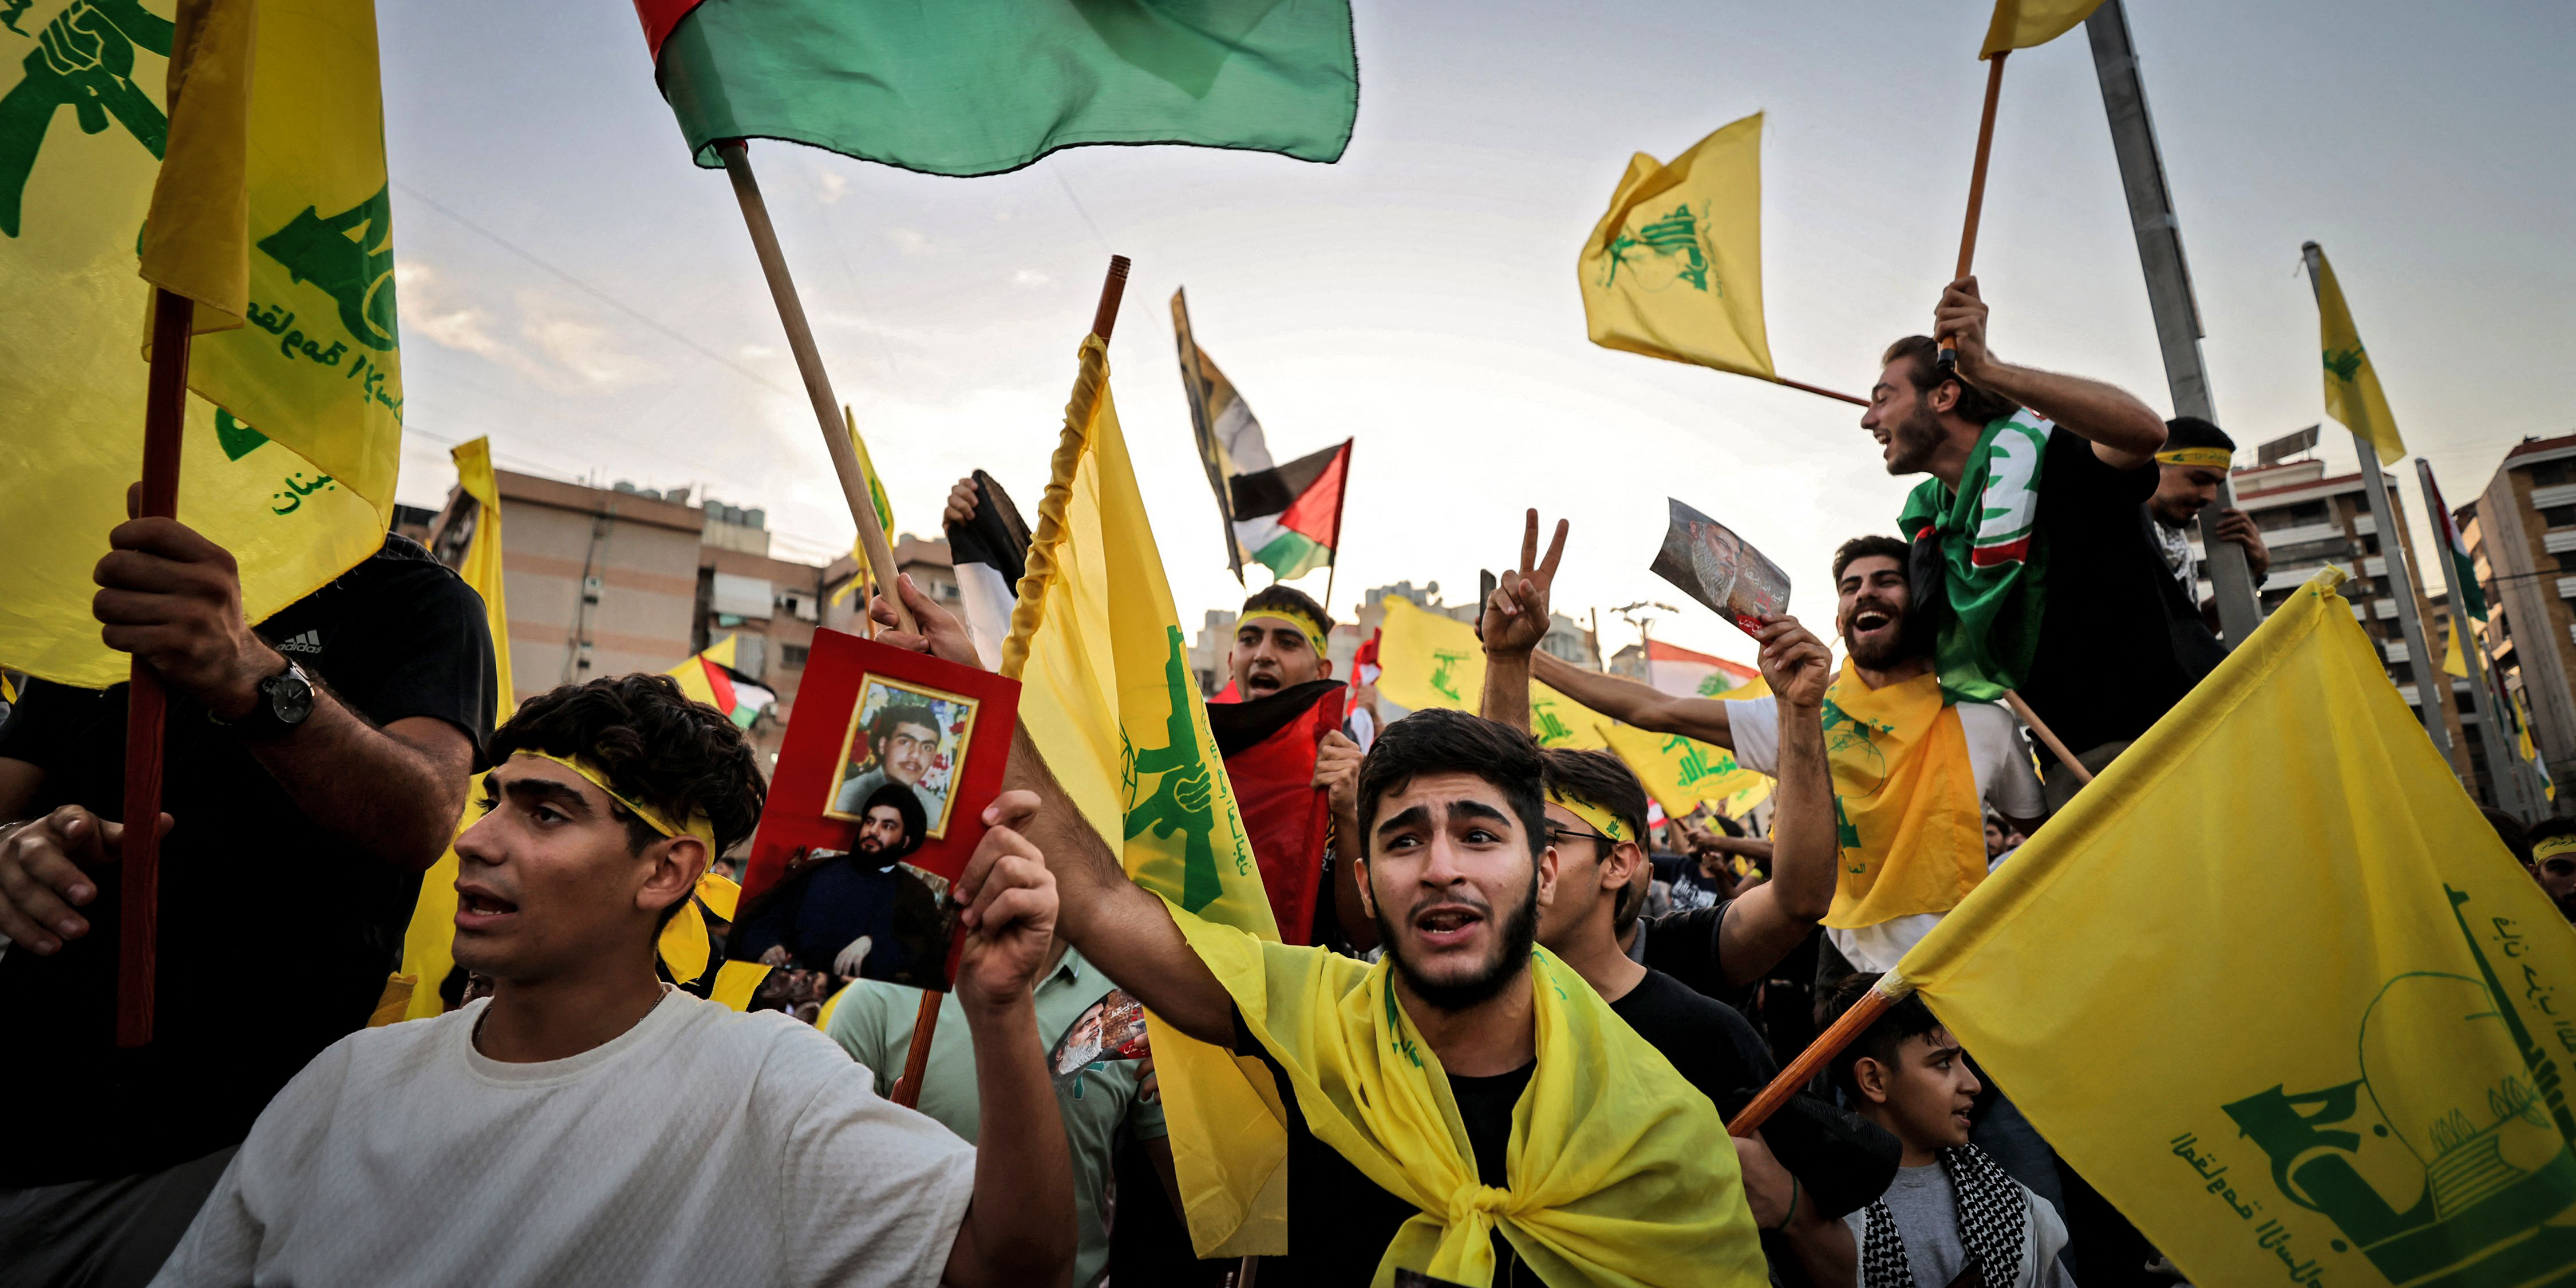 Supporters of the Lebanese Shiite movement Hezbollah wave flags as they watch a televised speech by its leader Hassan Nasrallah (unseen) in the Lebanese capital Beirut's southern suburbs on November 3, 2023. Nasrallah told the United States on November 3, that his Iran-backed group was ready to face its warships and the way to prevent a regional war was to halt the attacks in Gaza. (Photo by Ahmad Al-Rubaye / AFP) (Photo by AHMAD AL-RUBAYE/AFP via Getty Images)